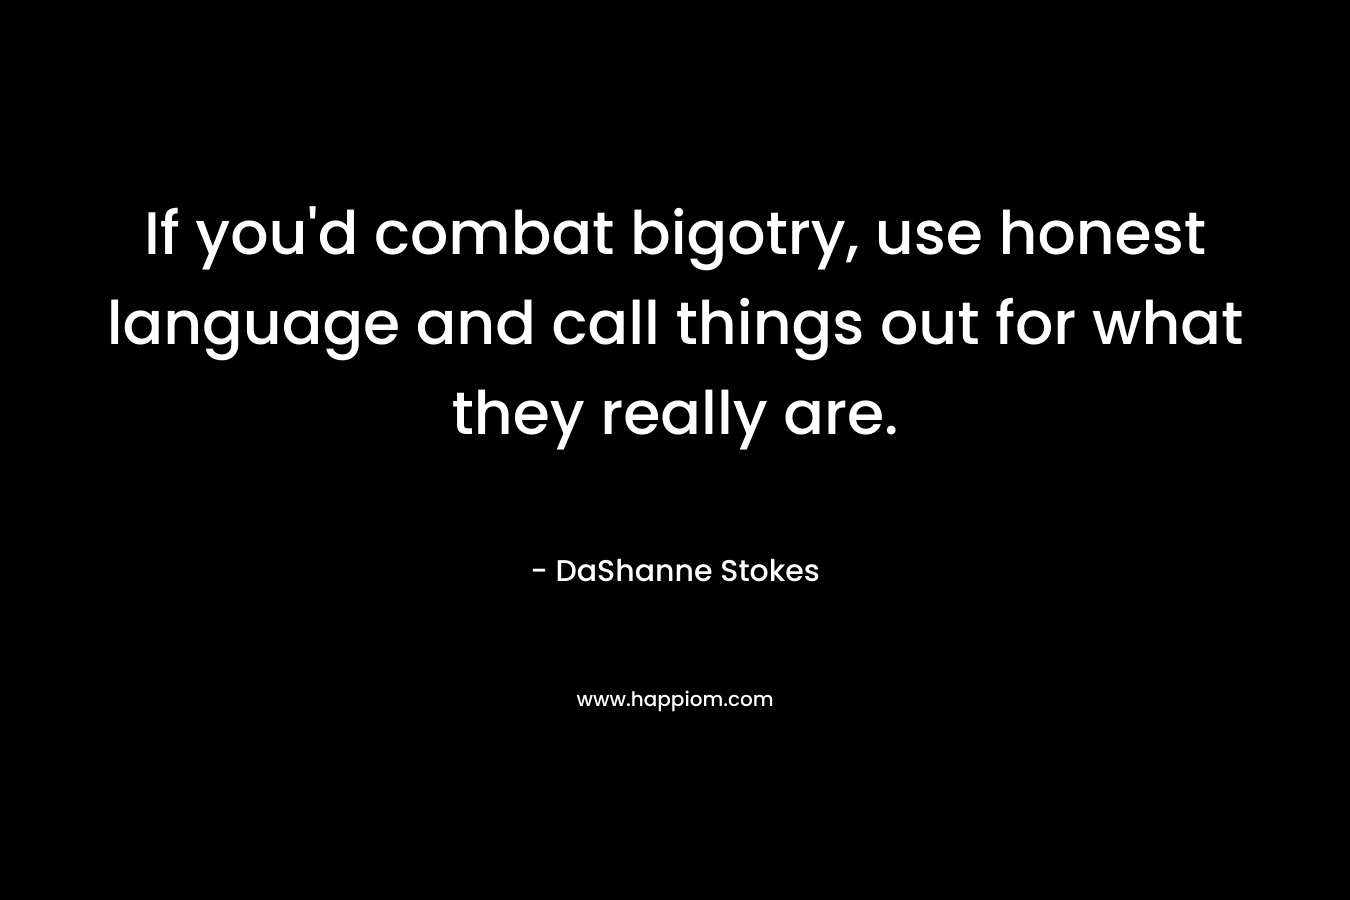 If you’d combat bigotry, use honest language and call things out for what they really are. – DaShanne Stokes